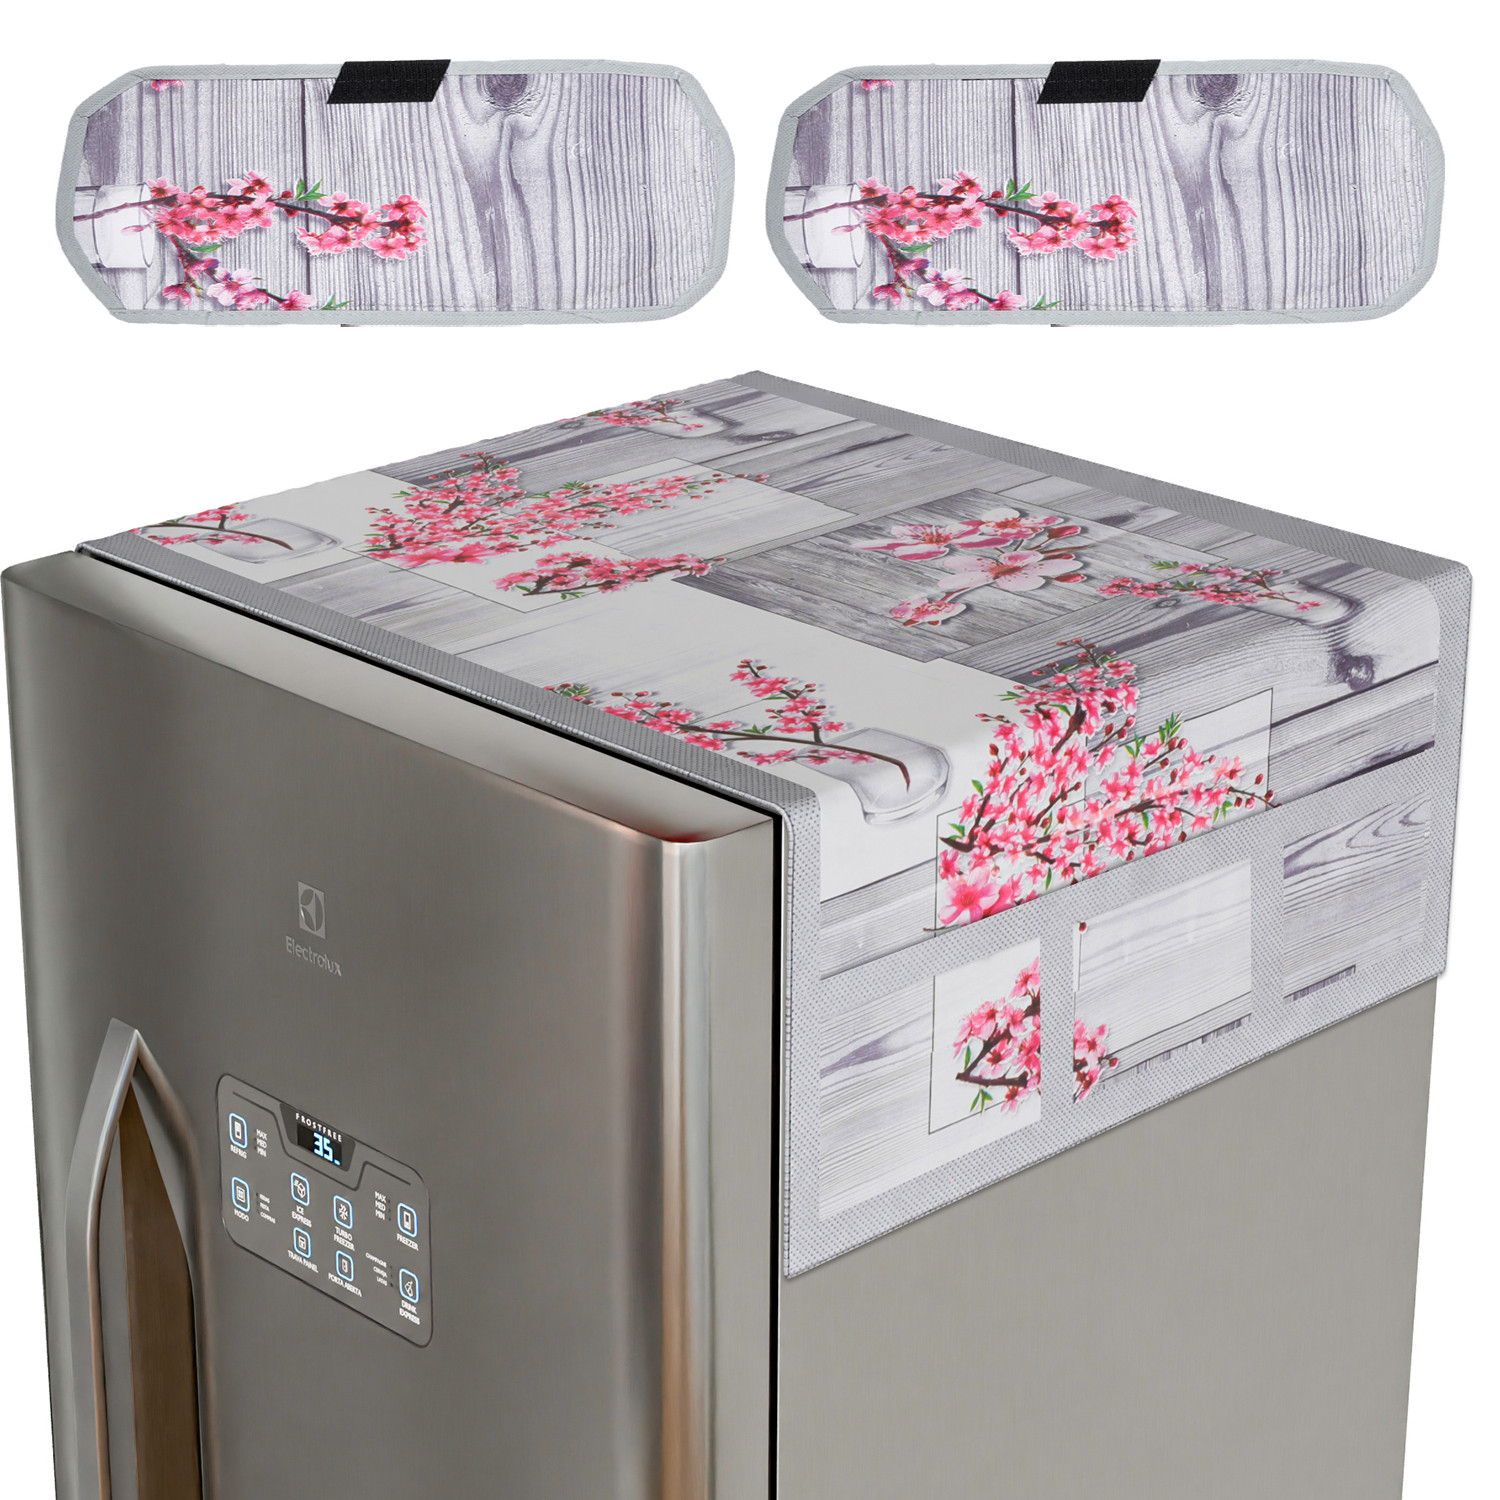 Kuber Industries Fridge Top Cover & Handle Cover Set | Fridge Top & Handle Cover Set | Refrigerator Cover & Handle Cover Combo Set | Flower Fridge & Handle Cover | Gray